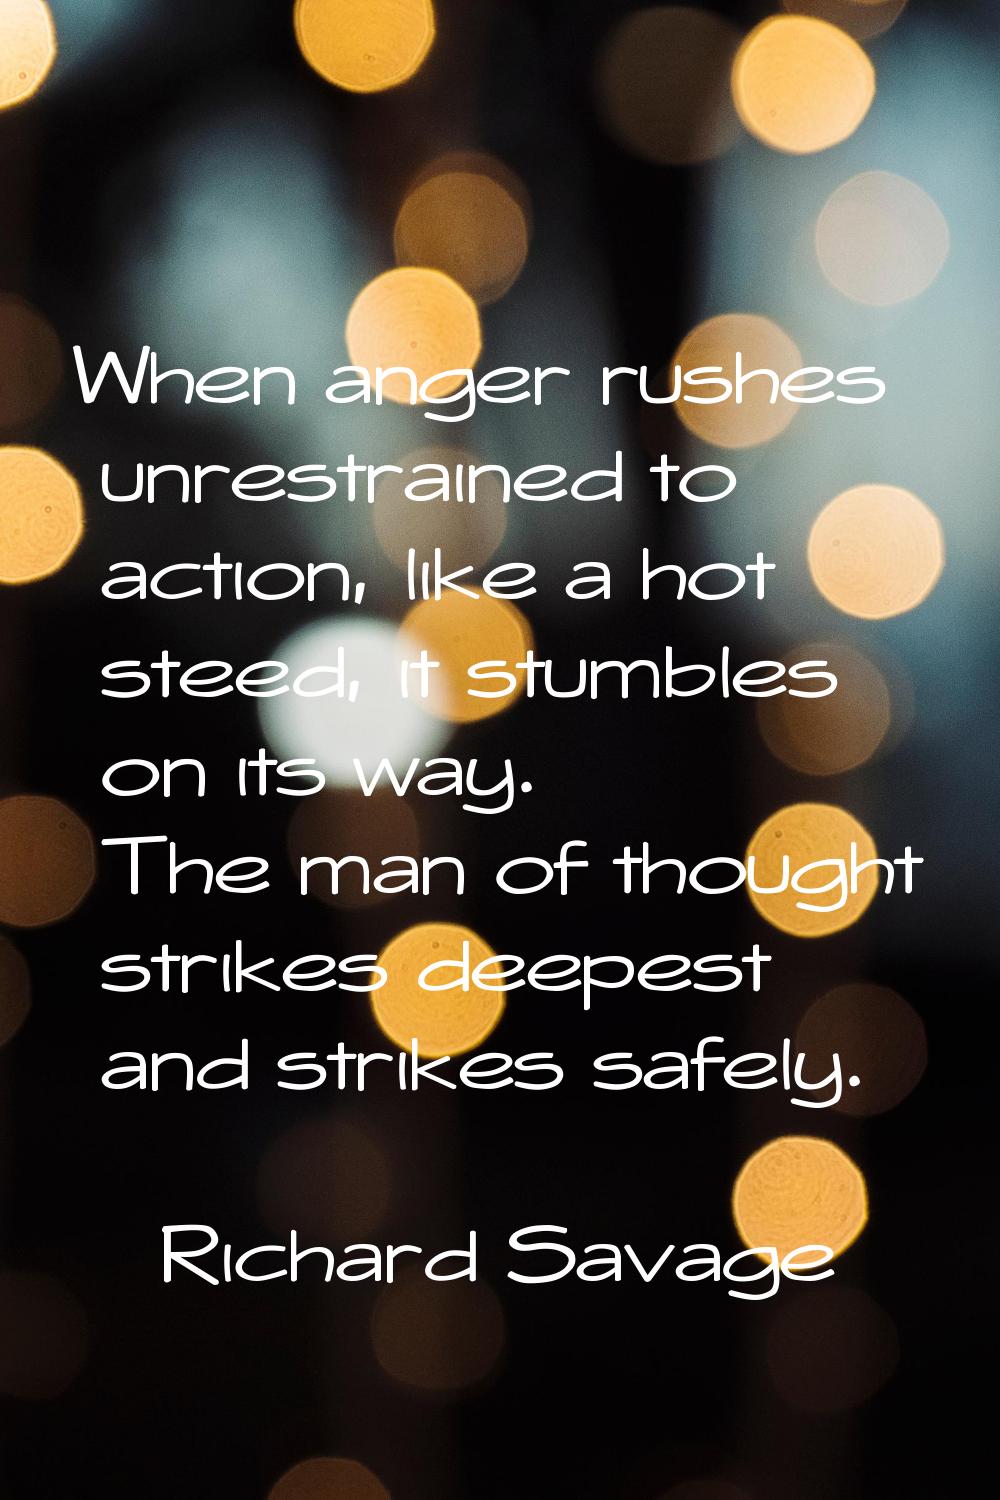 When anger rushes unrestrained to action, like a hot steed, it stumbles on its way. The man of thou